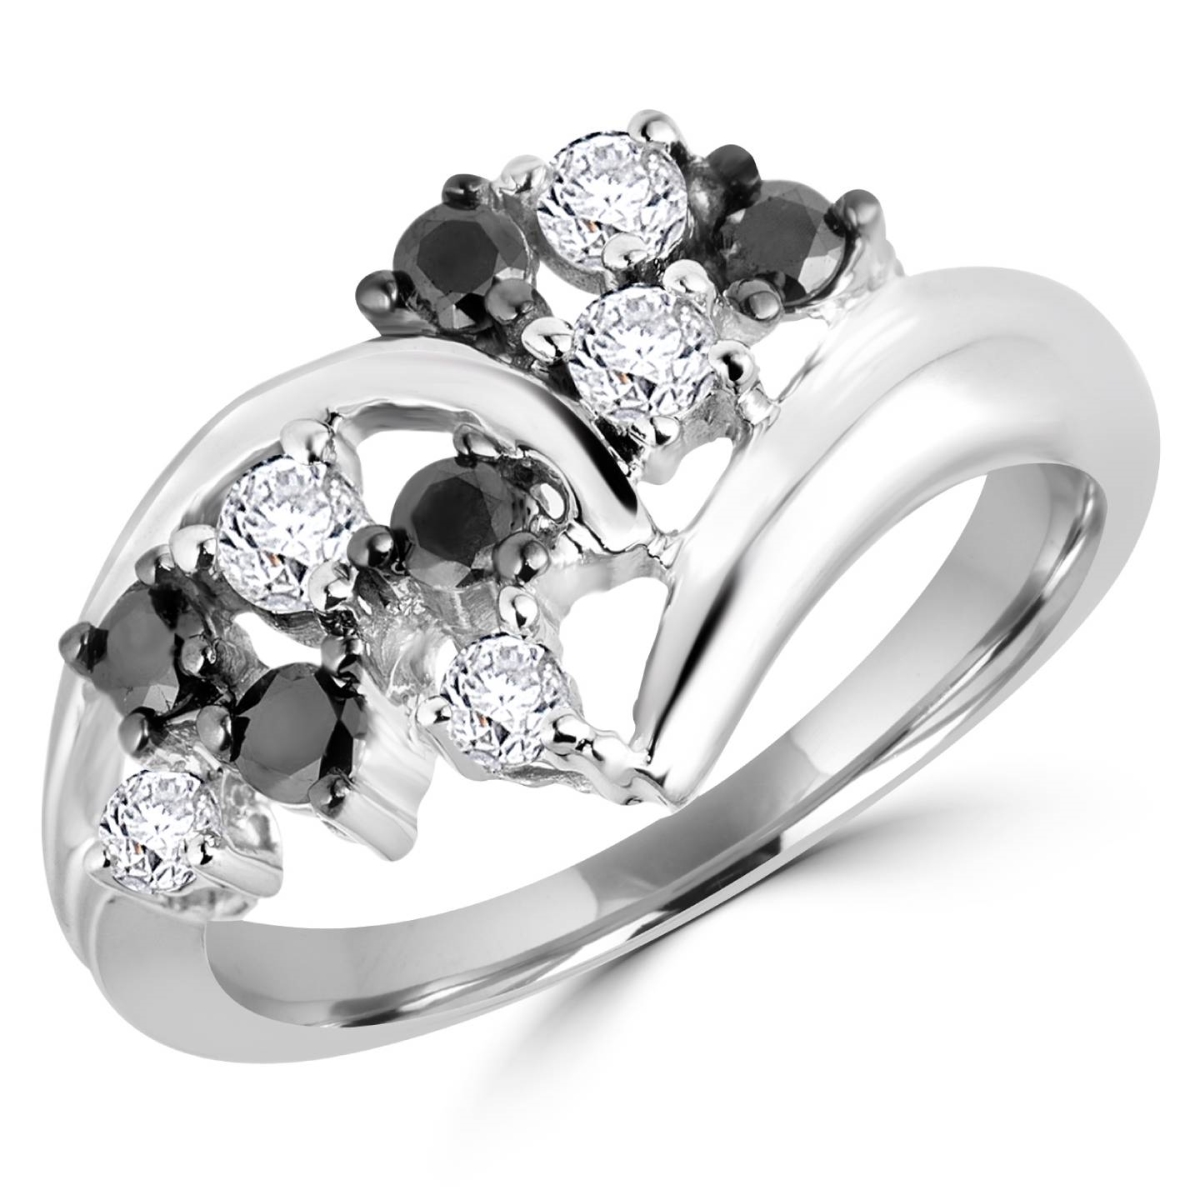 Picture of Majesty Diamonds MDR140090-9 0.5 CTW Black & White Diamond Fashion Cocktail Ring in 14K White Gold - Size 9